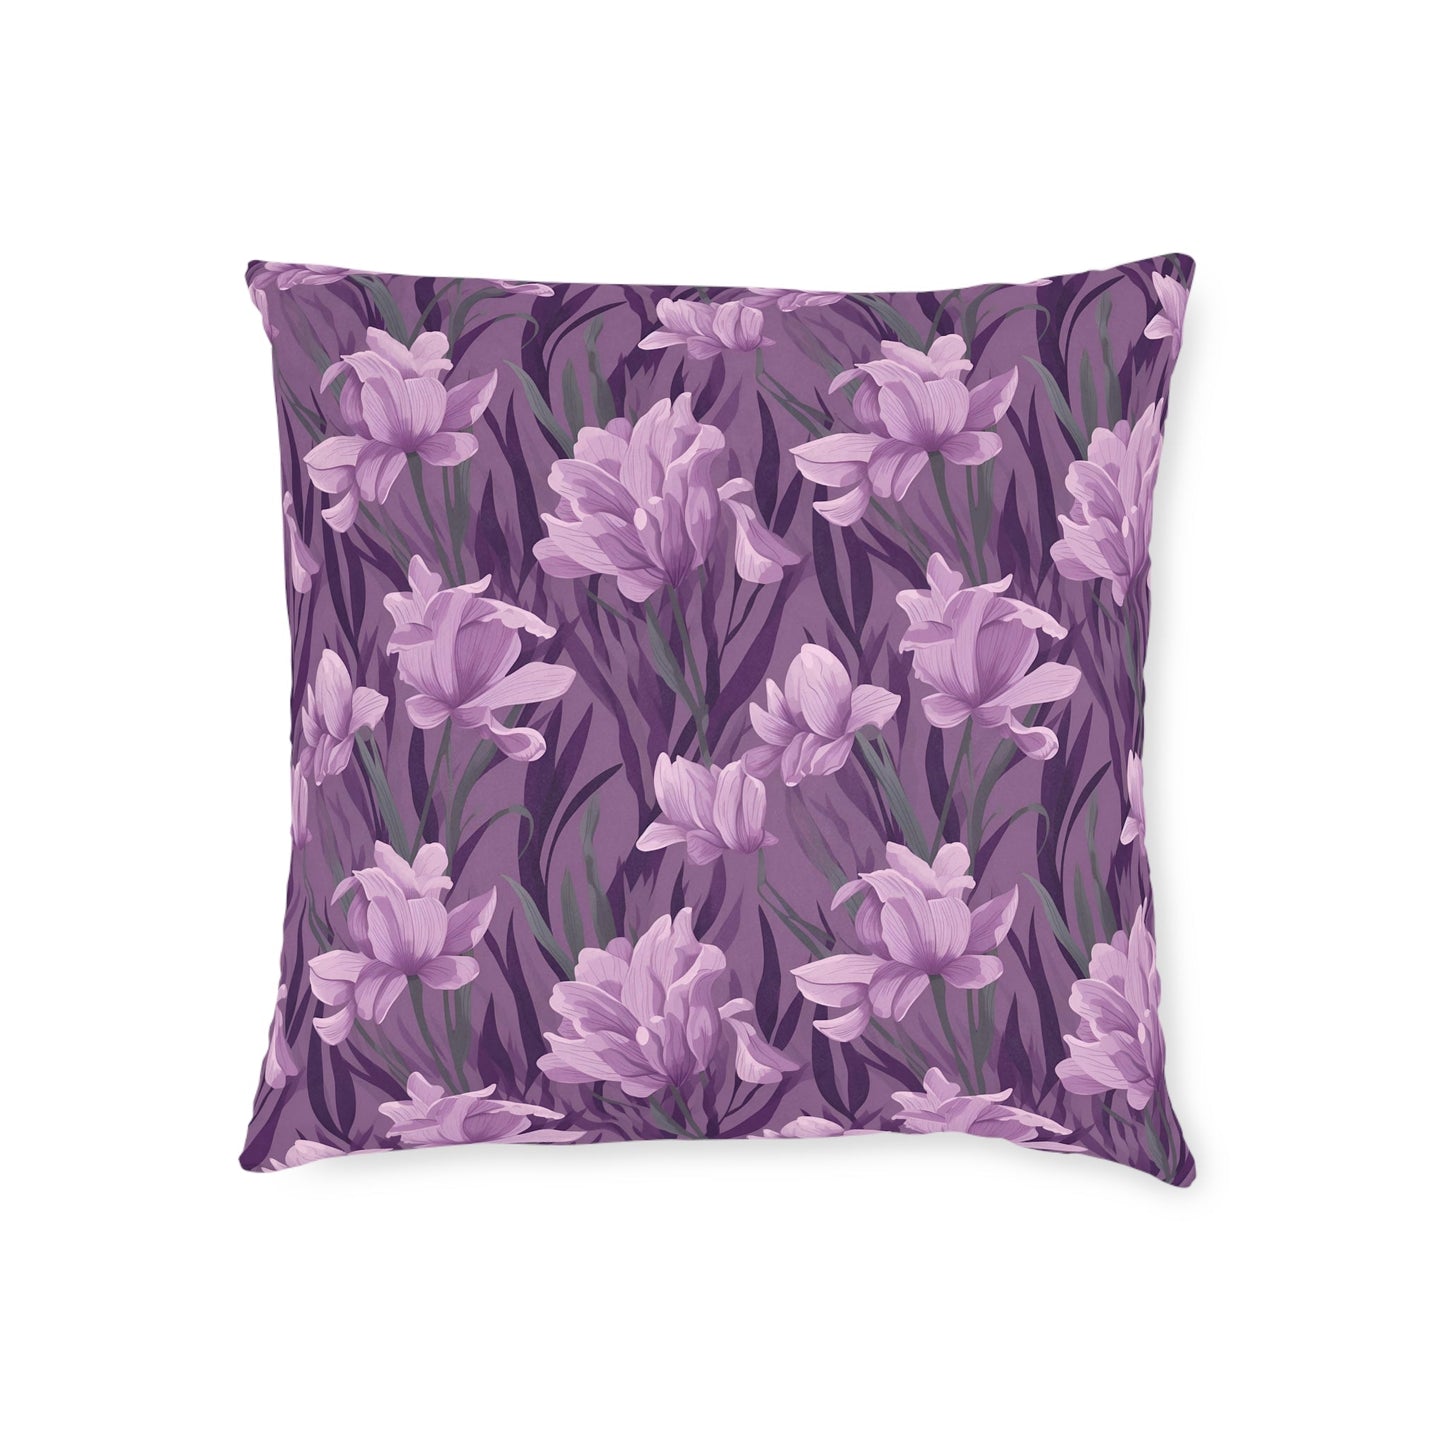 Springtime Violet Harmony - Delicate Purple Blooms Design Sofa and Chair Cushion - Pattern Symphony